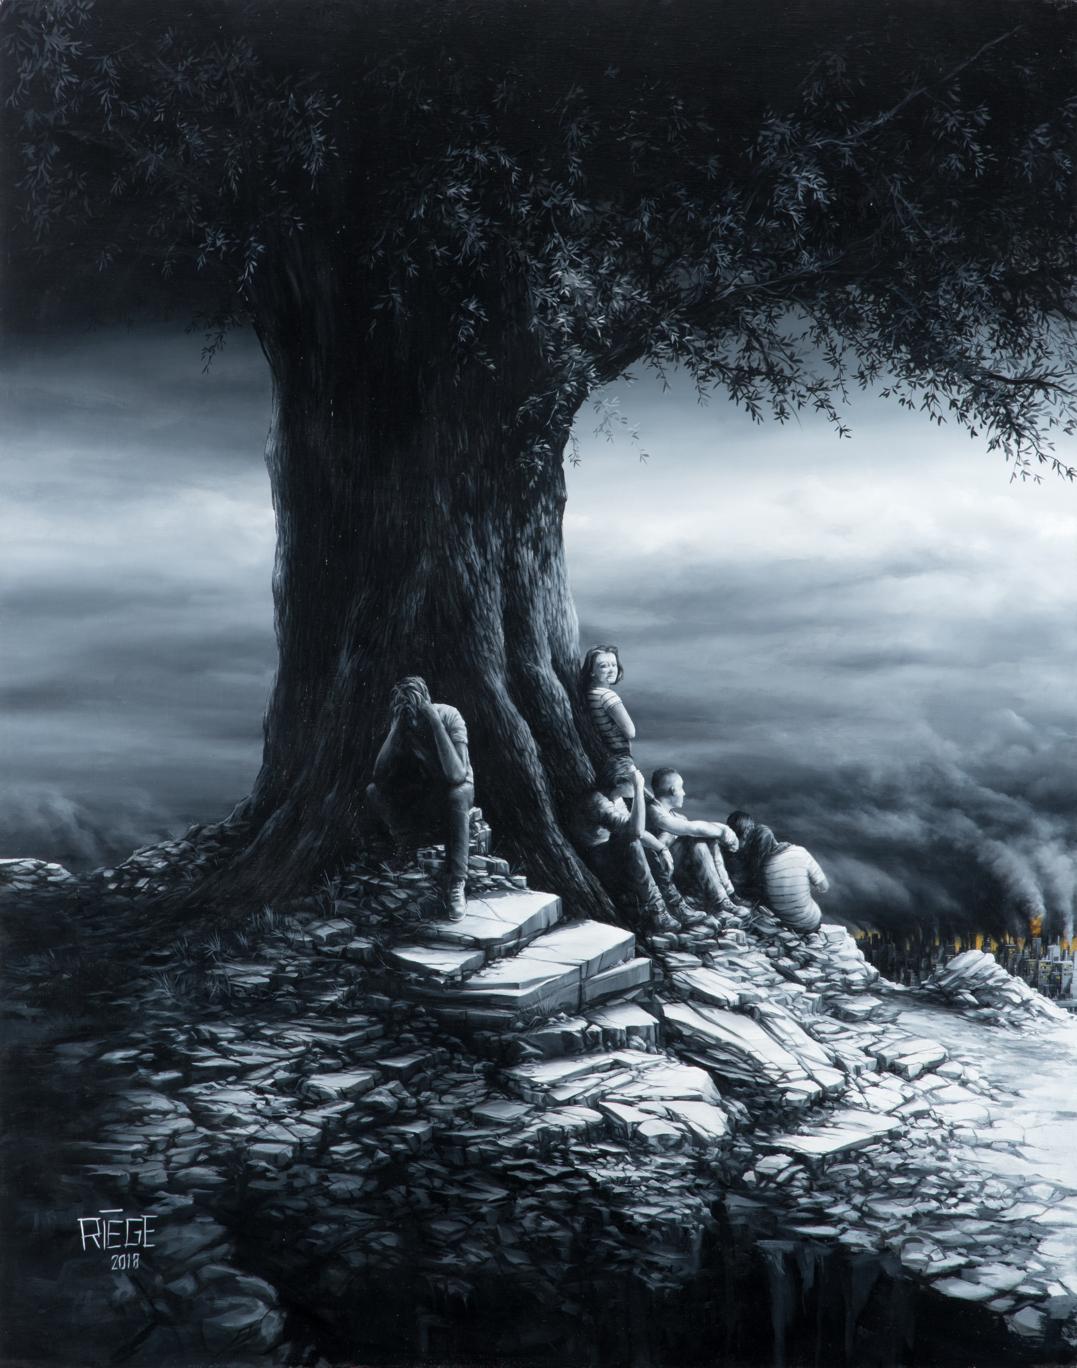 The last tree before arriving - Painting by Richard Gosselin-Riege